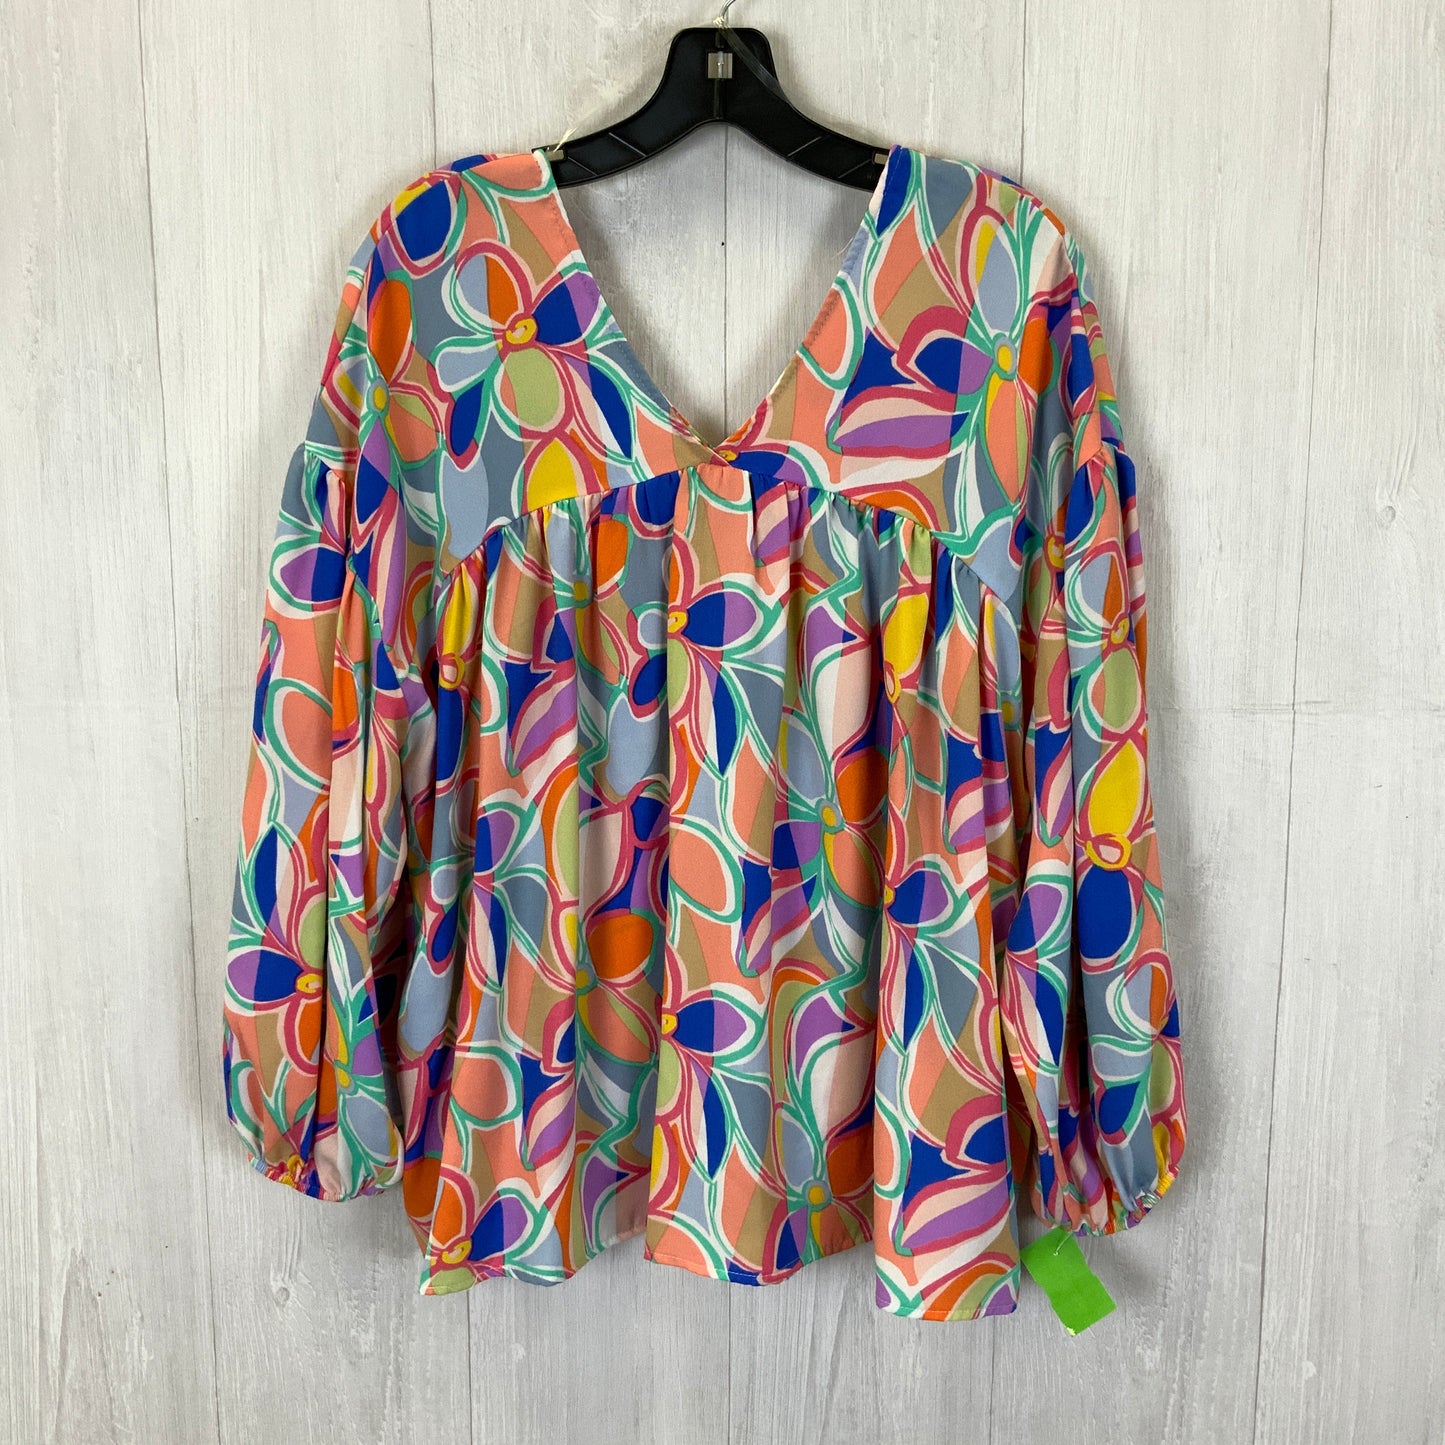 Multi-colored Top 3/4 Sleeve First Love, Size M